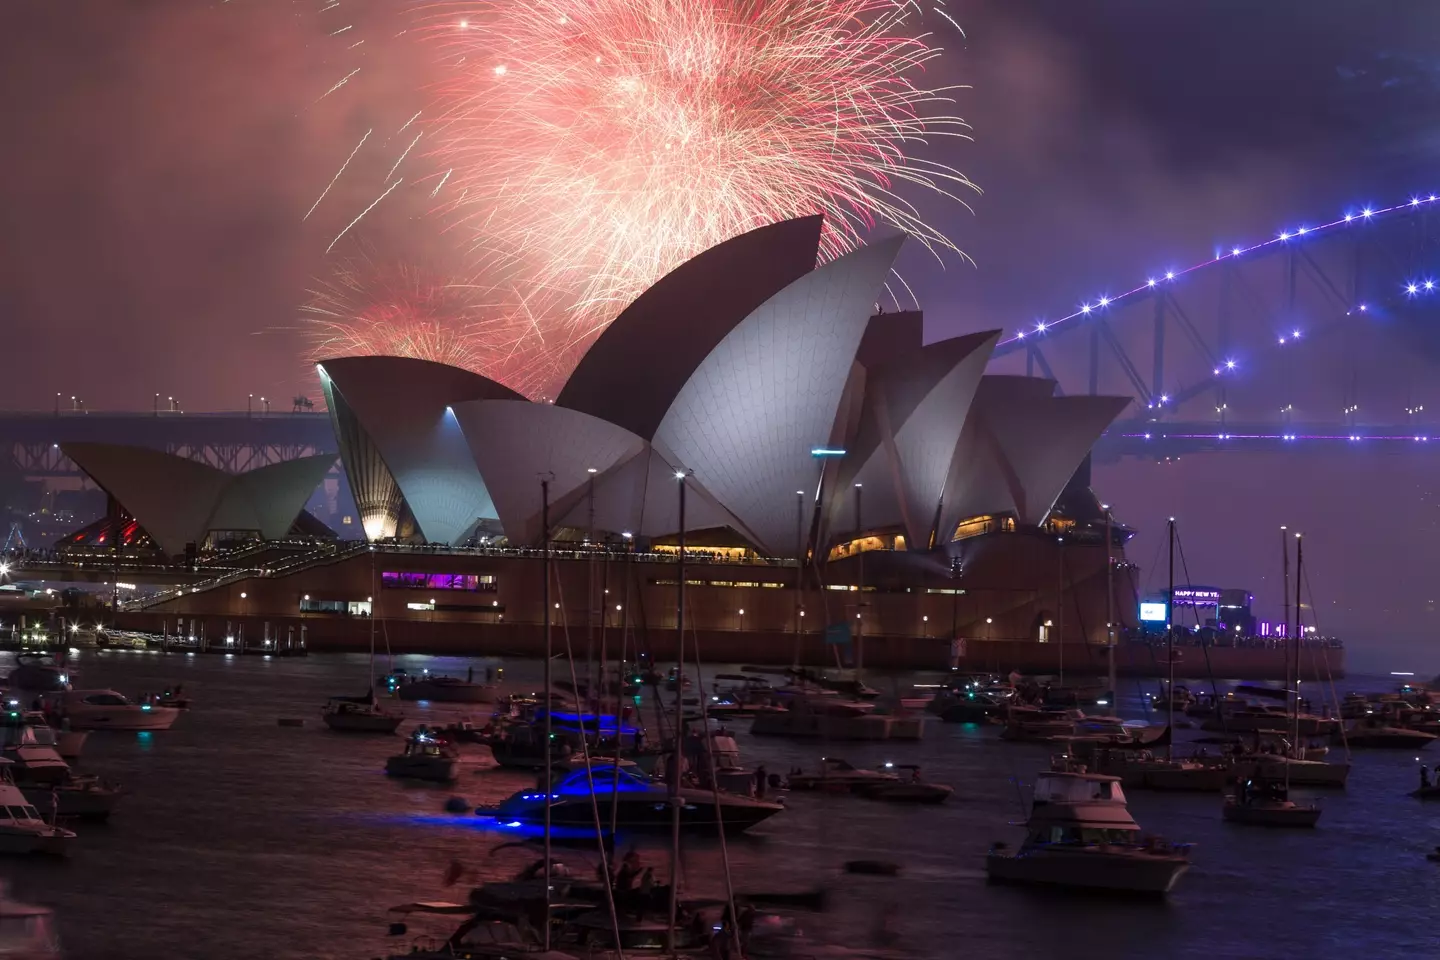 Sydney hosted two fireworks displays, one at 9:00pm and another at midnight.